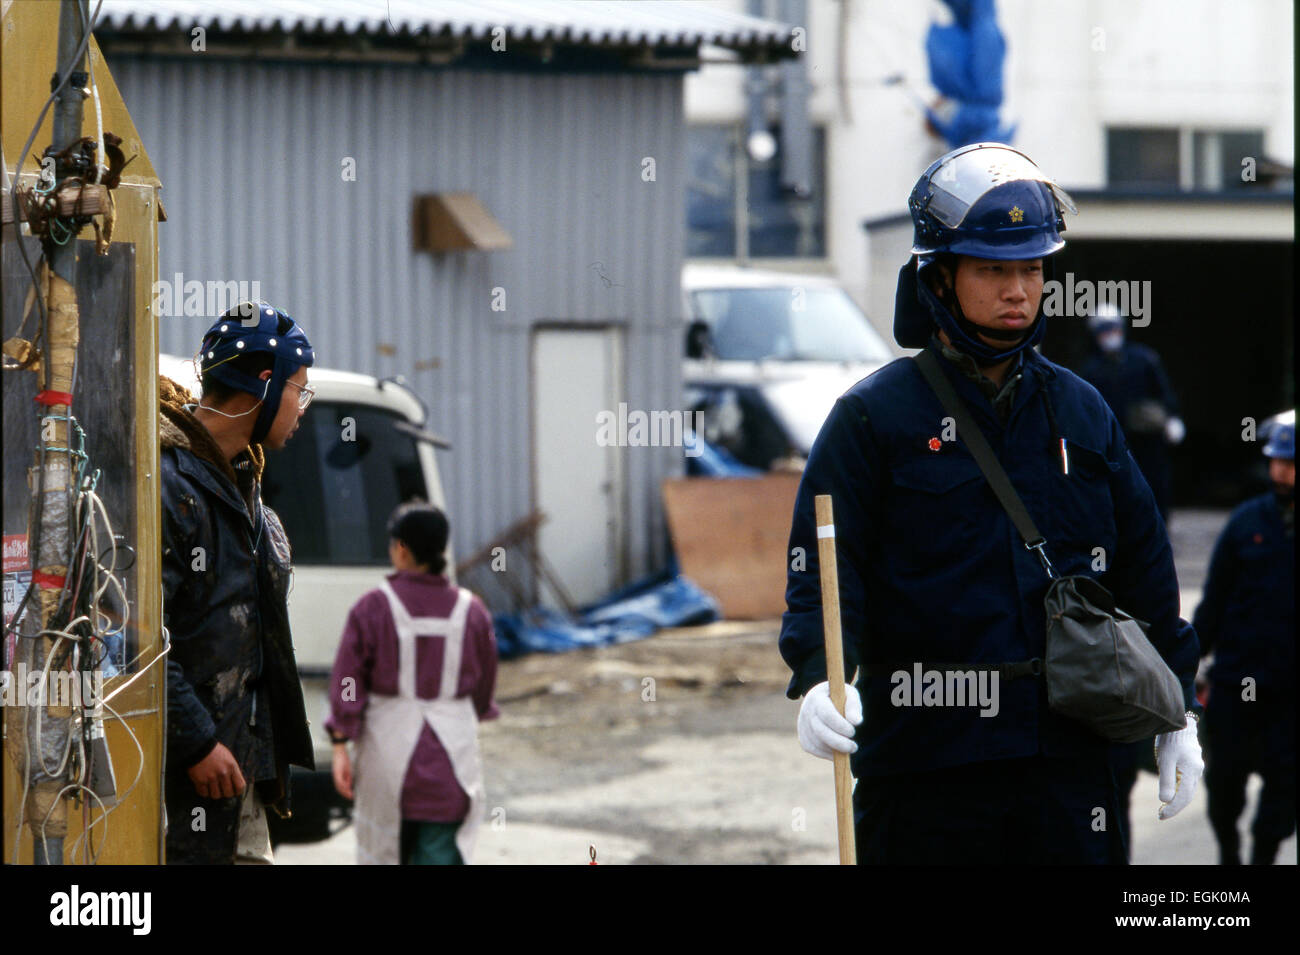 April, 1995, Kamikuisshiki Mura, Japan - A member Aum wearing a headgear walks behind a riot police trooper during a raid on the cult's facility - No. 2 Satyam - on the foot of Mt. Fuji in April 1995. Police found explosives, chemical weapons and biological warfare agents and a Russian Mil Mi-17 military helicopter. On the morning of 20 March 1995, Aum members released sarin in a coordinated attack on five trains in the Tokyo subway system, killing 13 commuters, seriously injuring 54 and affecting 980 more. Some estimates claim as many as 6,000 people were injured by the sarin. (Photo by Haruy Stock Photo